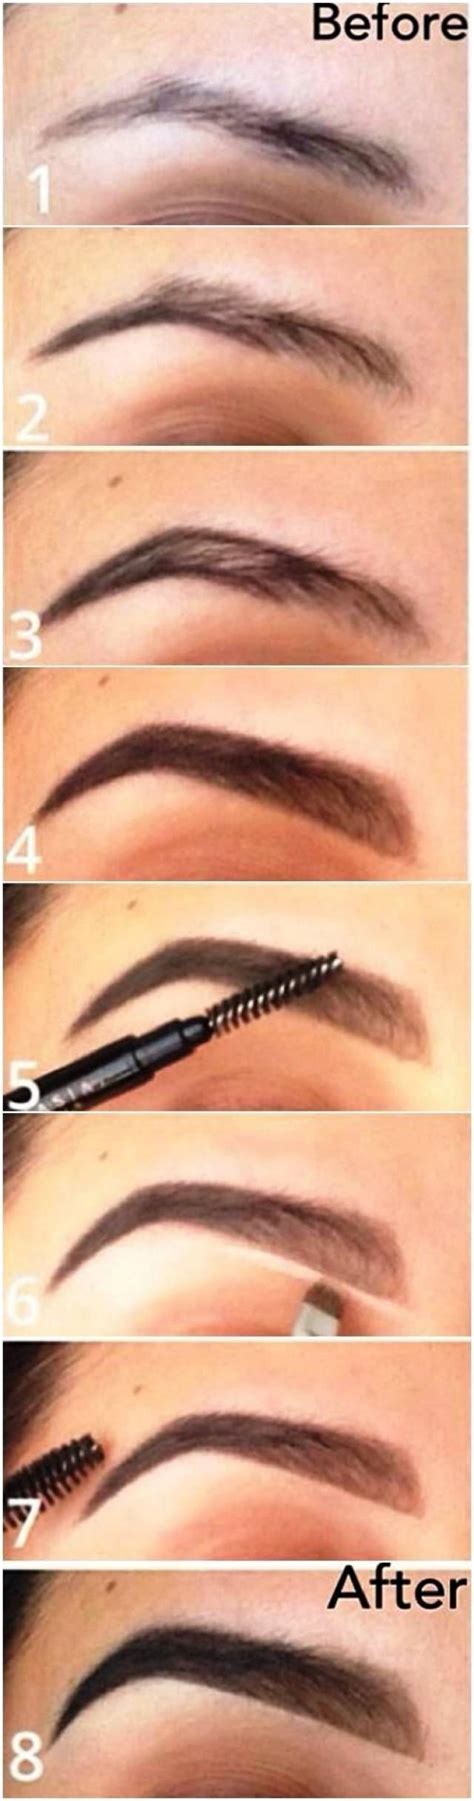 Tutorial How To Make Your Eyebrows Thicker With Makeup 2212338